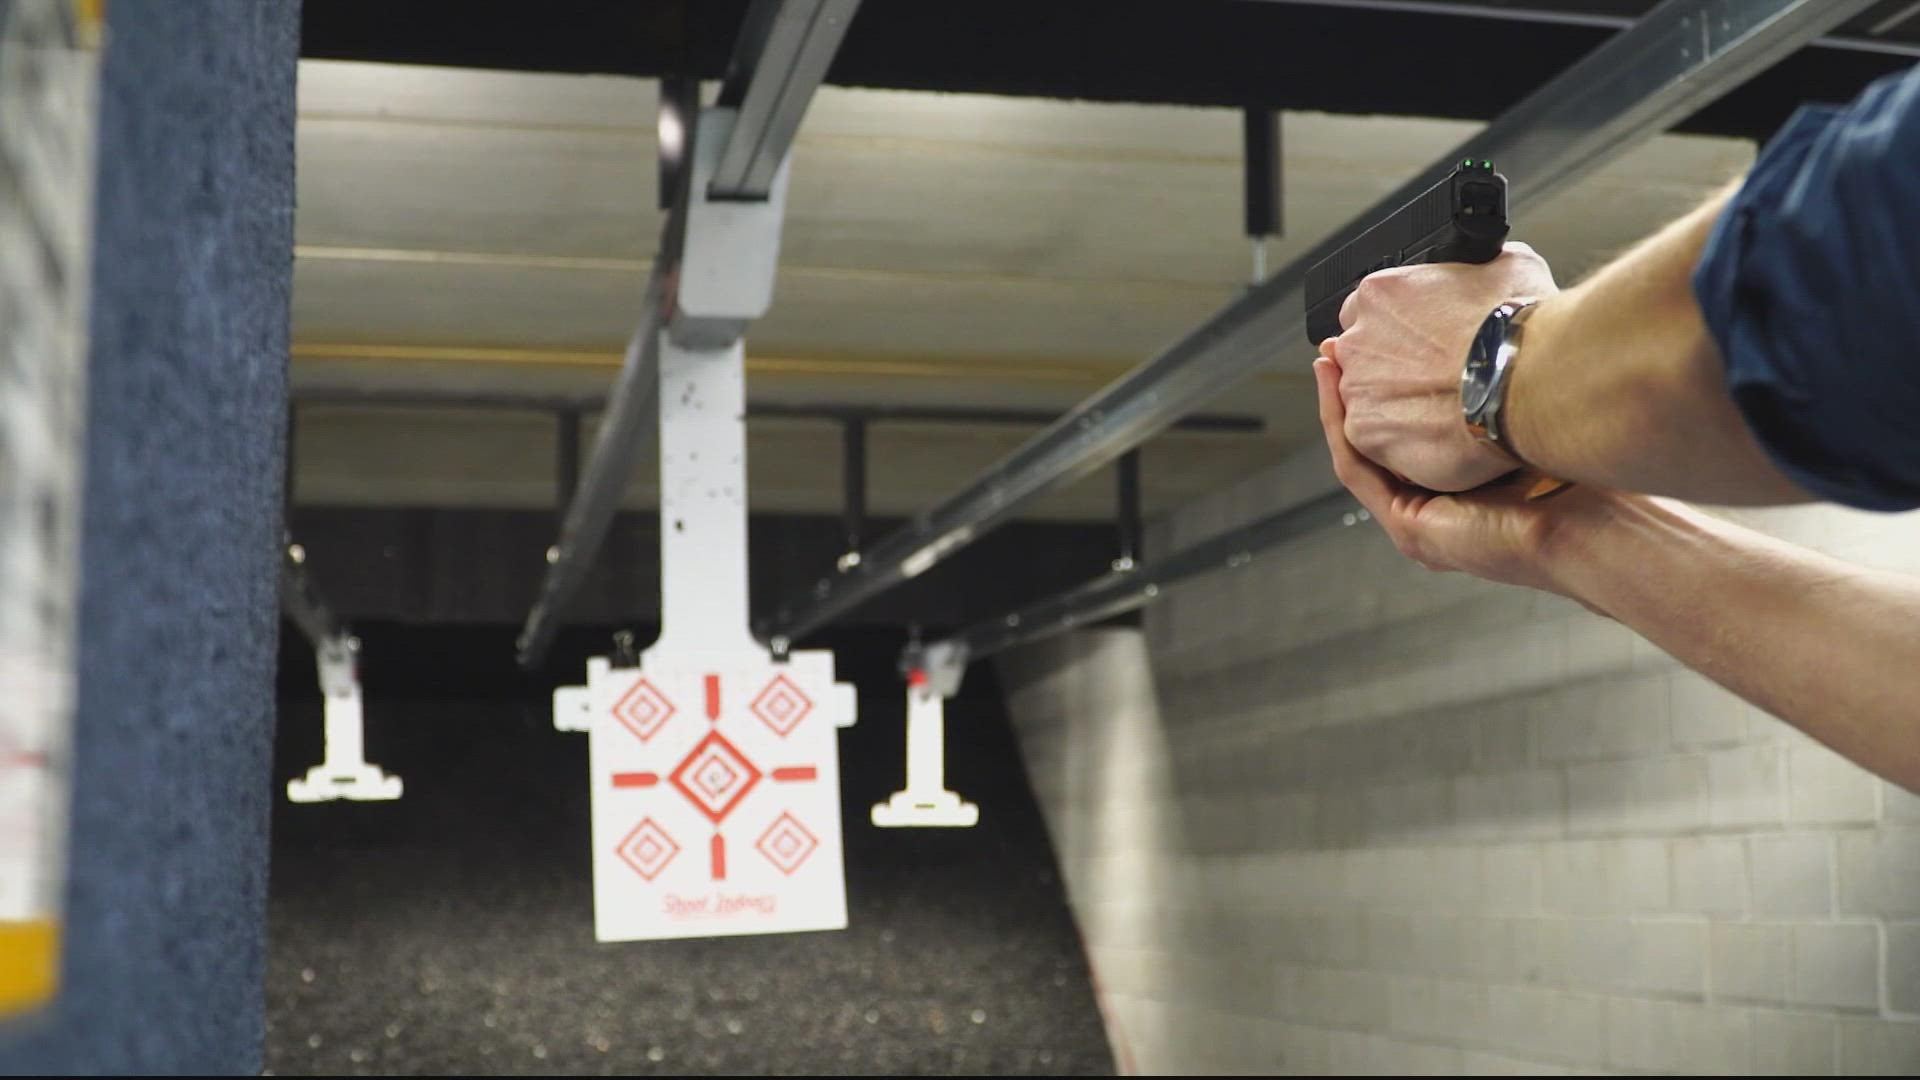 A new company out of Tennessee has designs on mass producing the first “smart gun.”